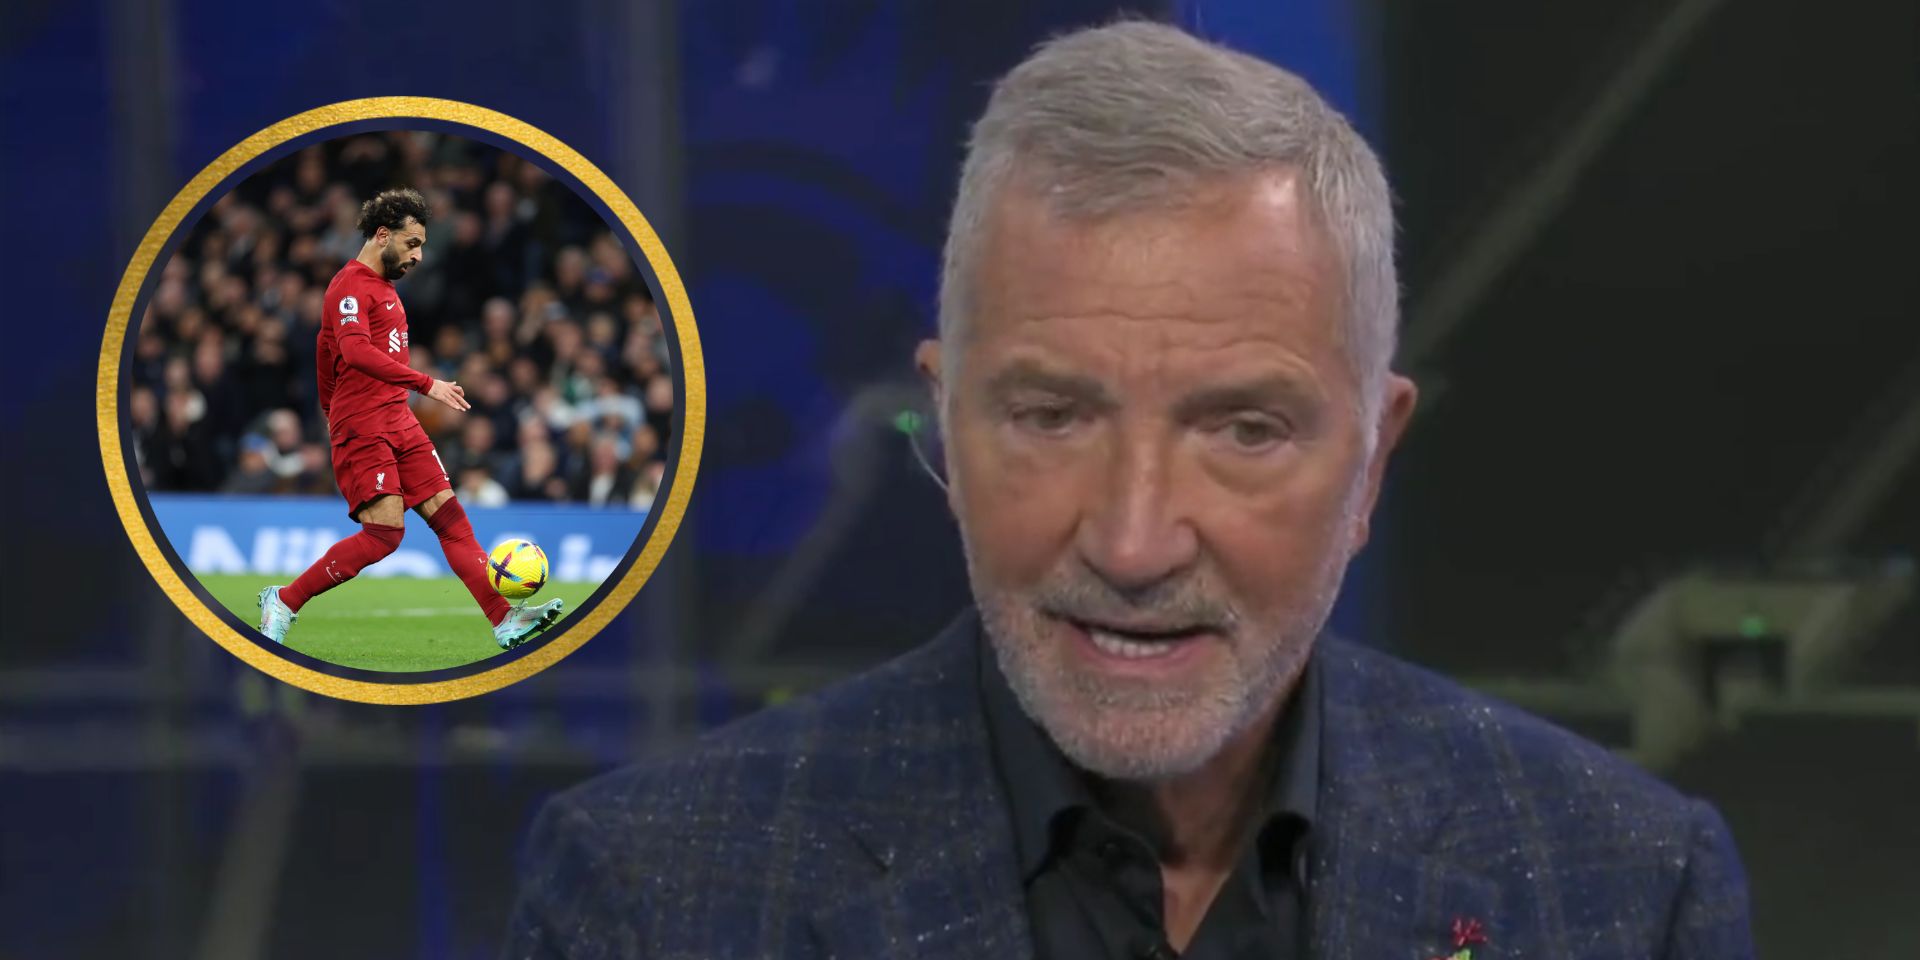 (Video) Souness on what Salah ‘needs to get back to’ after consistency concerns